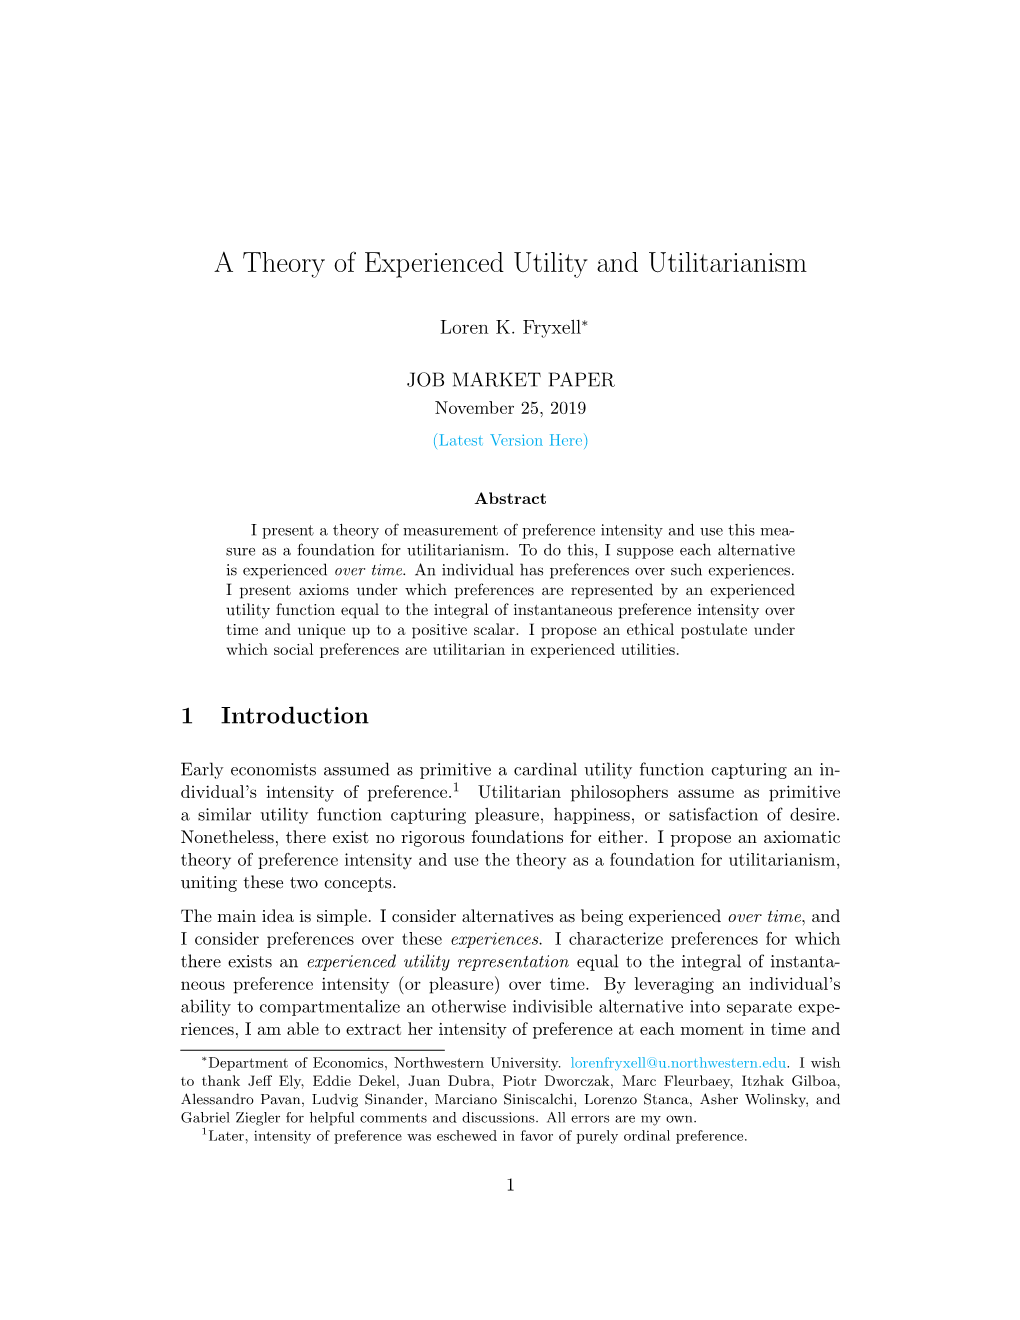 A Theory of Experienced Utility and Utilitarianism